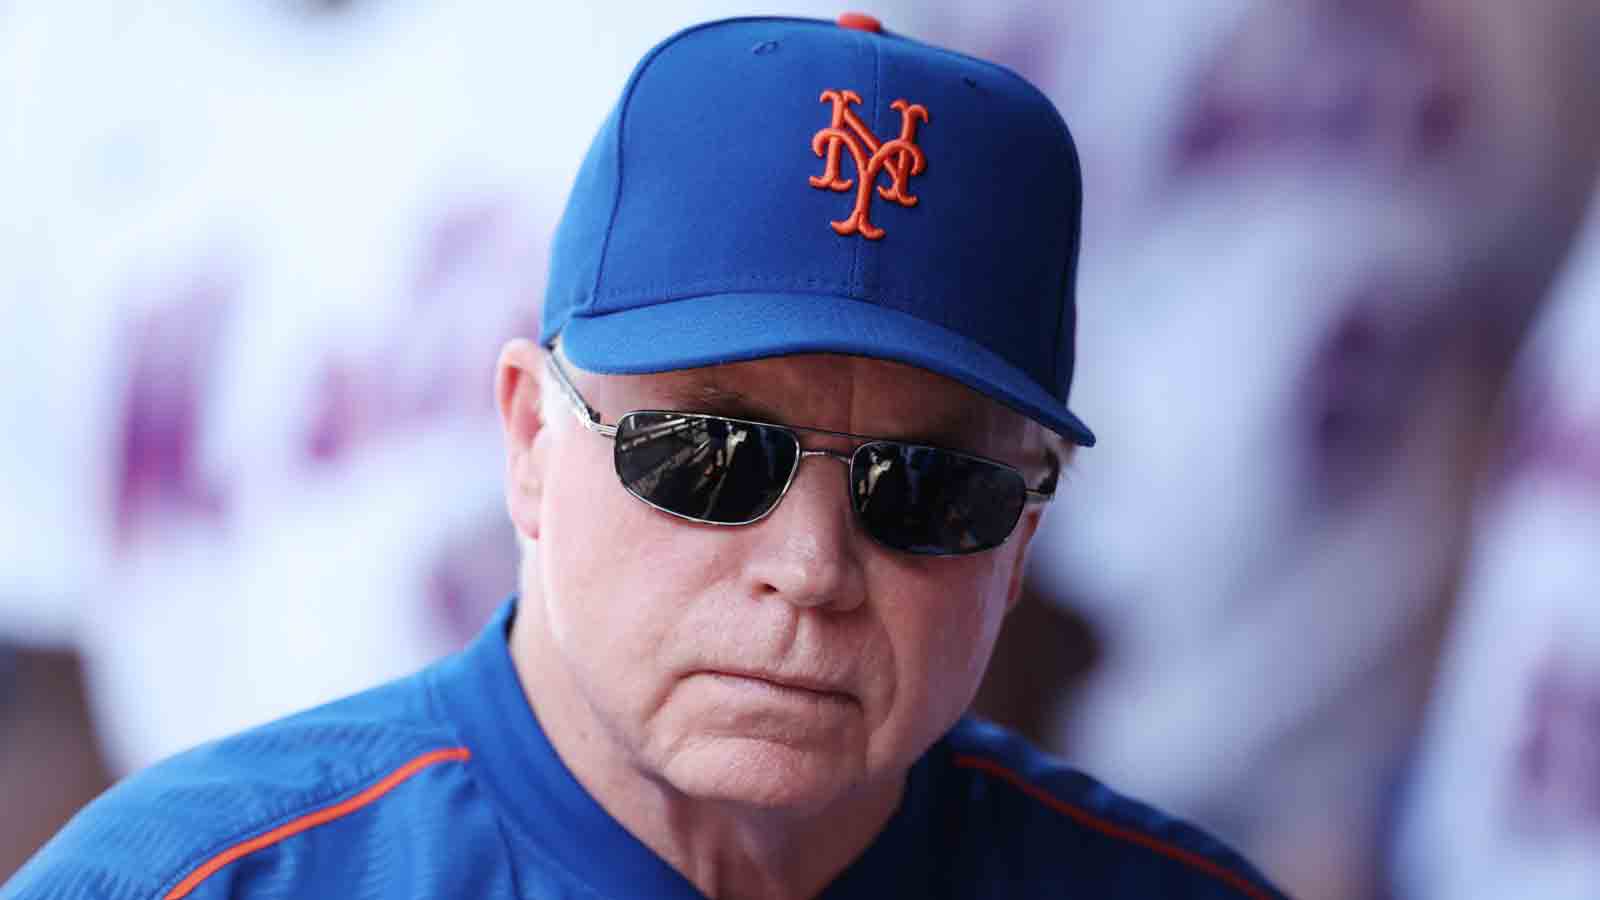 New York Mets manager Showalter voted Manager of the Year